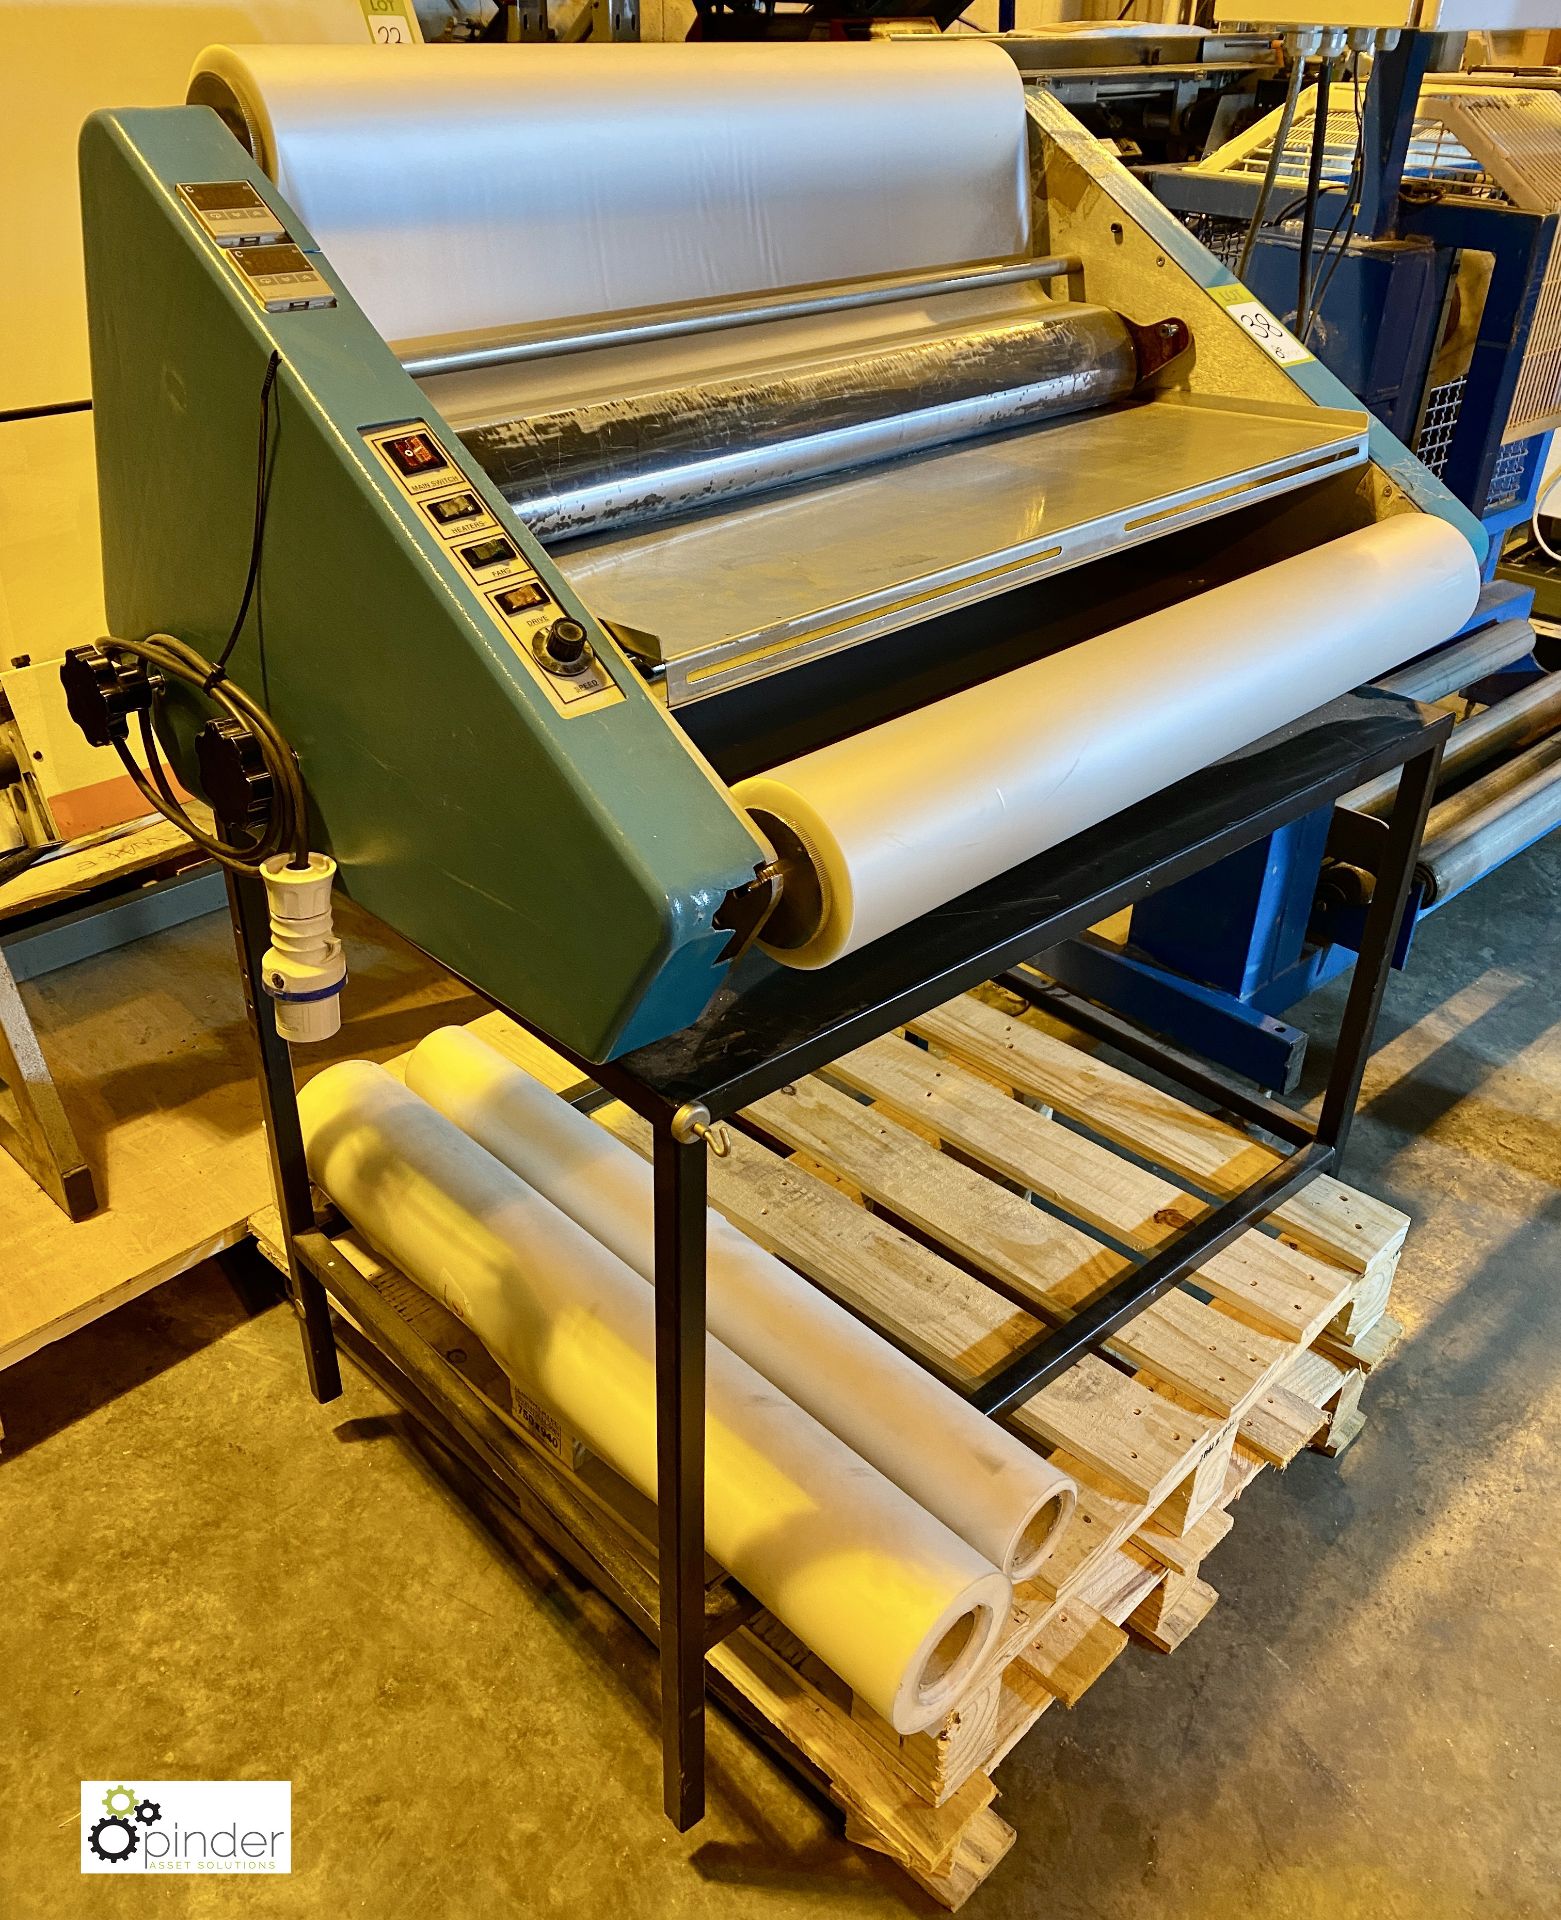 Morane RFTL 800 Roll Laminator, 800mm width, 240volts (please note there is a lift out fee of £5 - Image 6 of 6